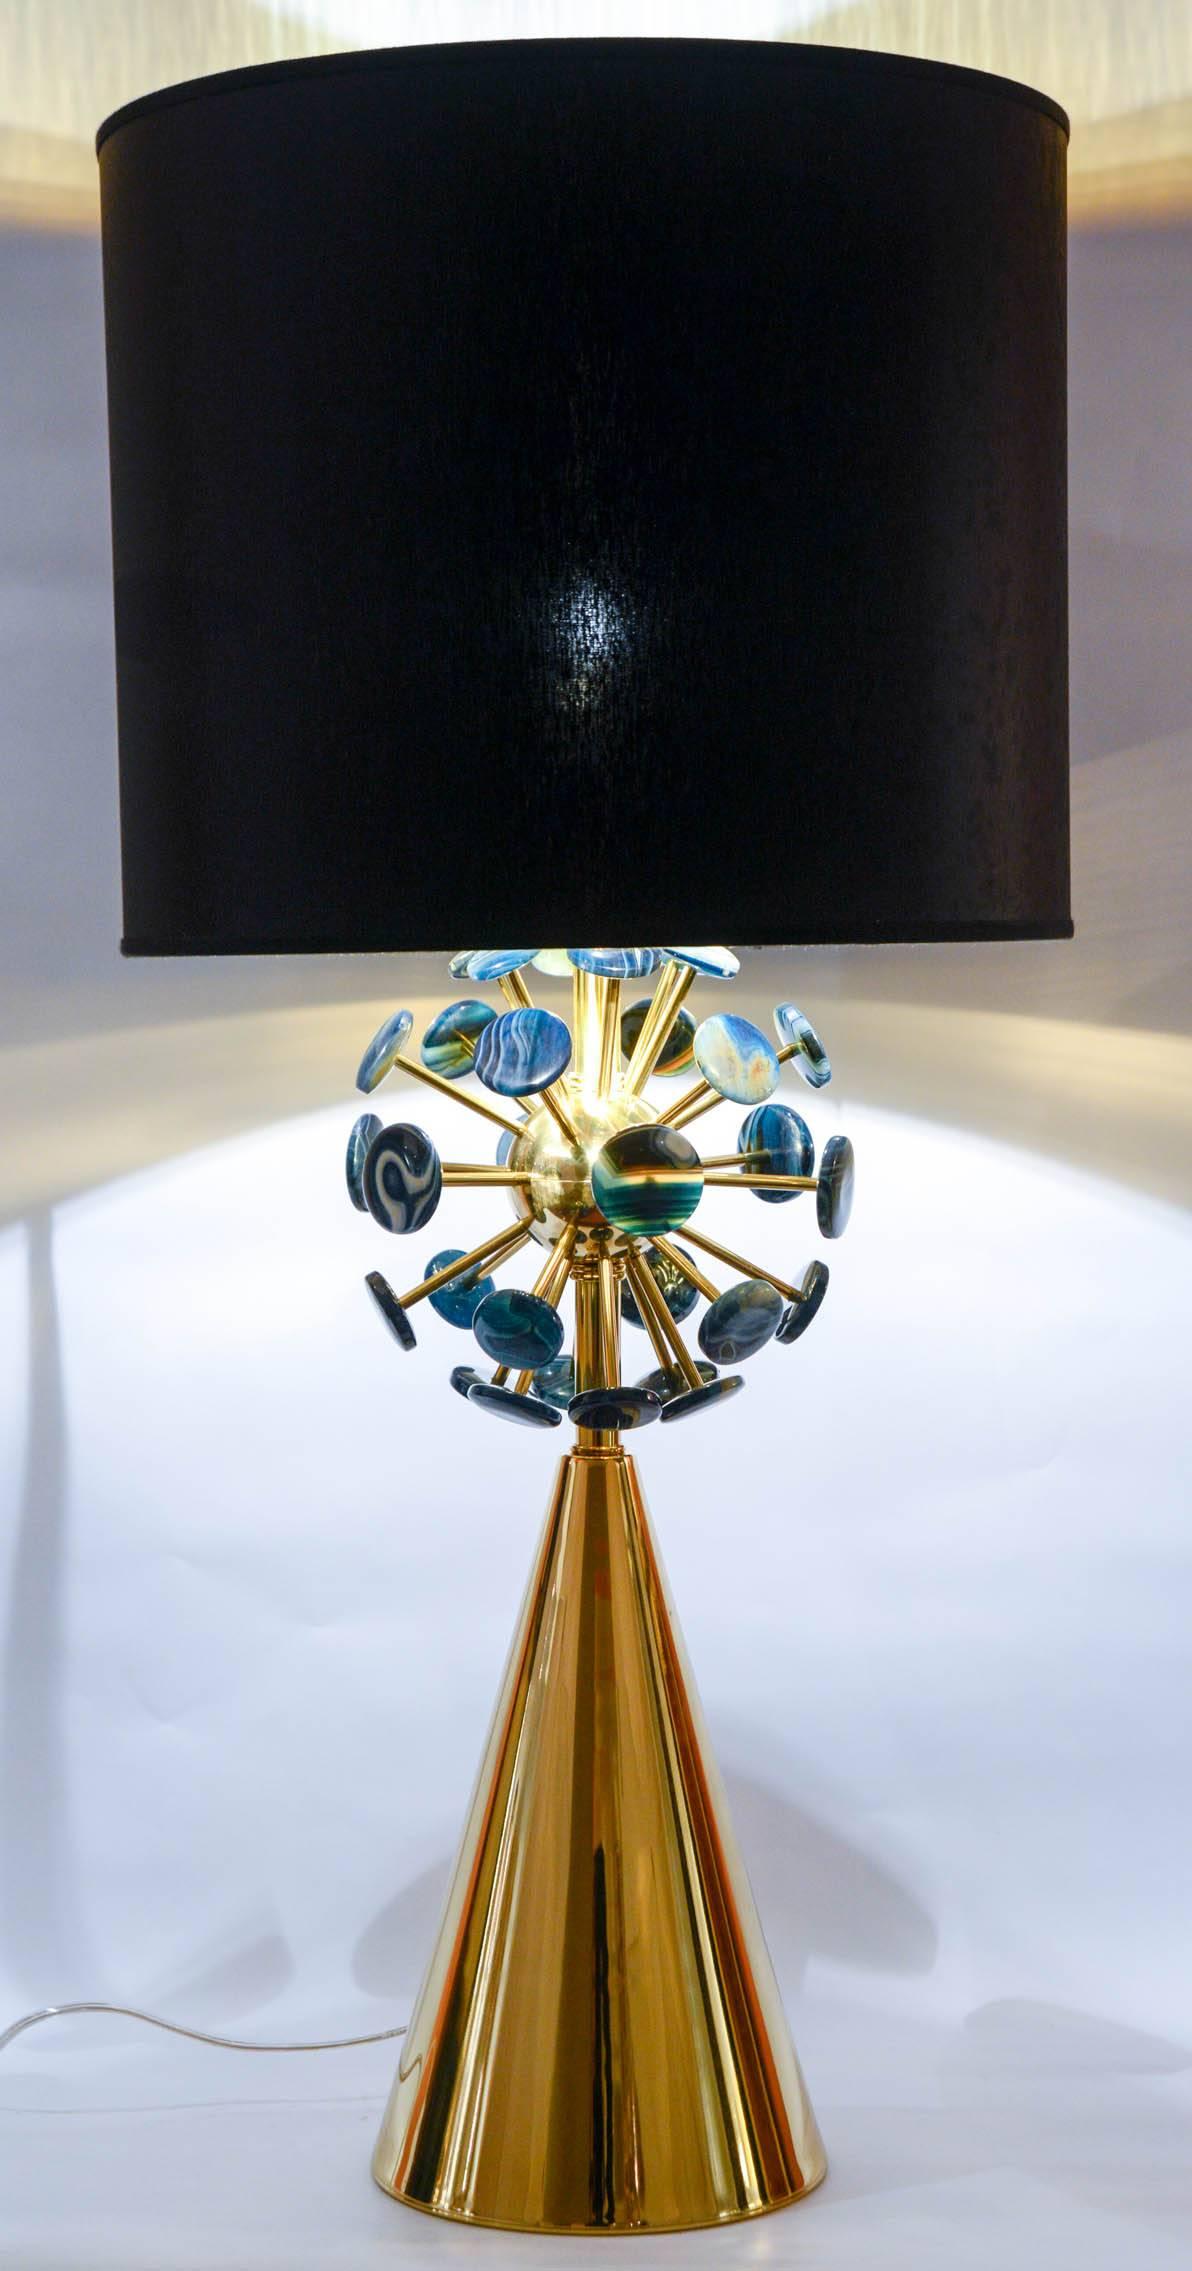 Contemporary Fantastic Pair of Lamps with Agates by Juanluca Fontan